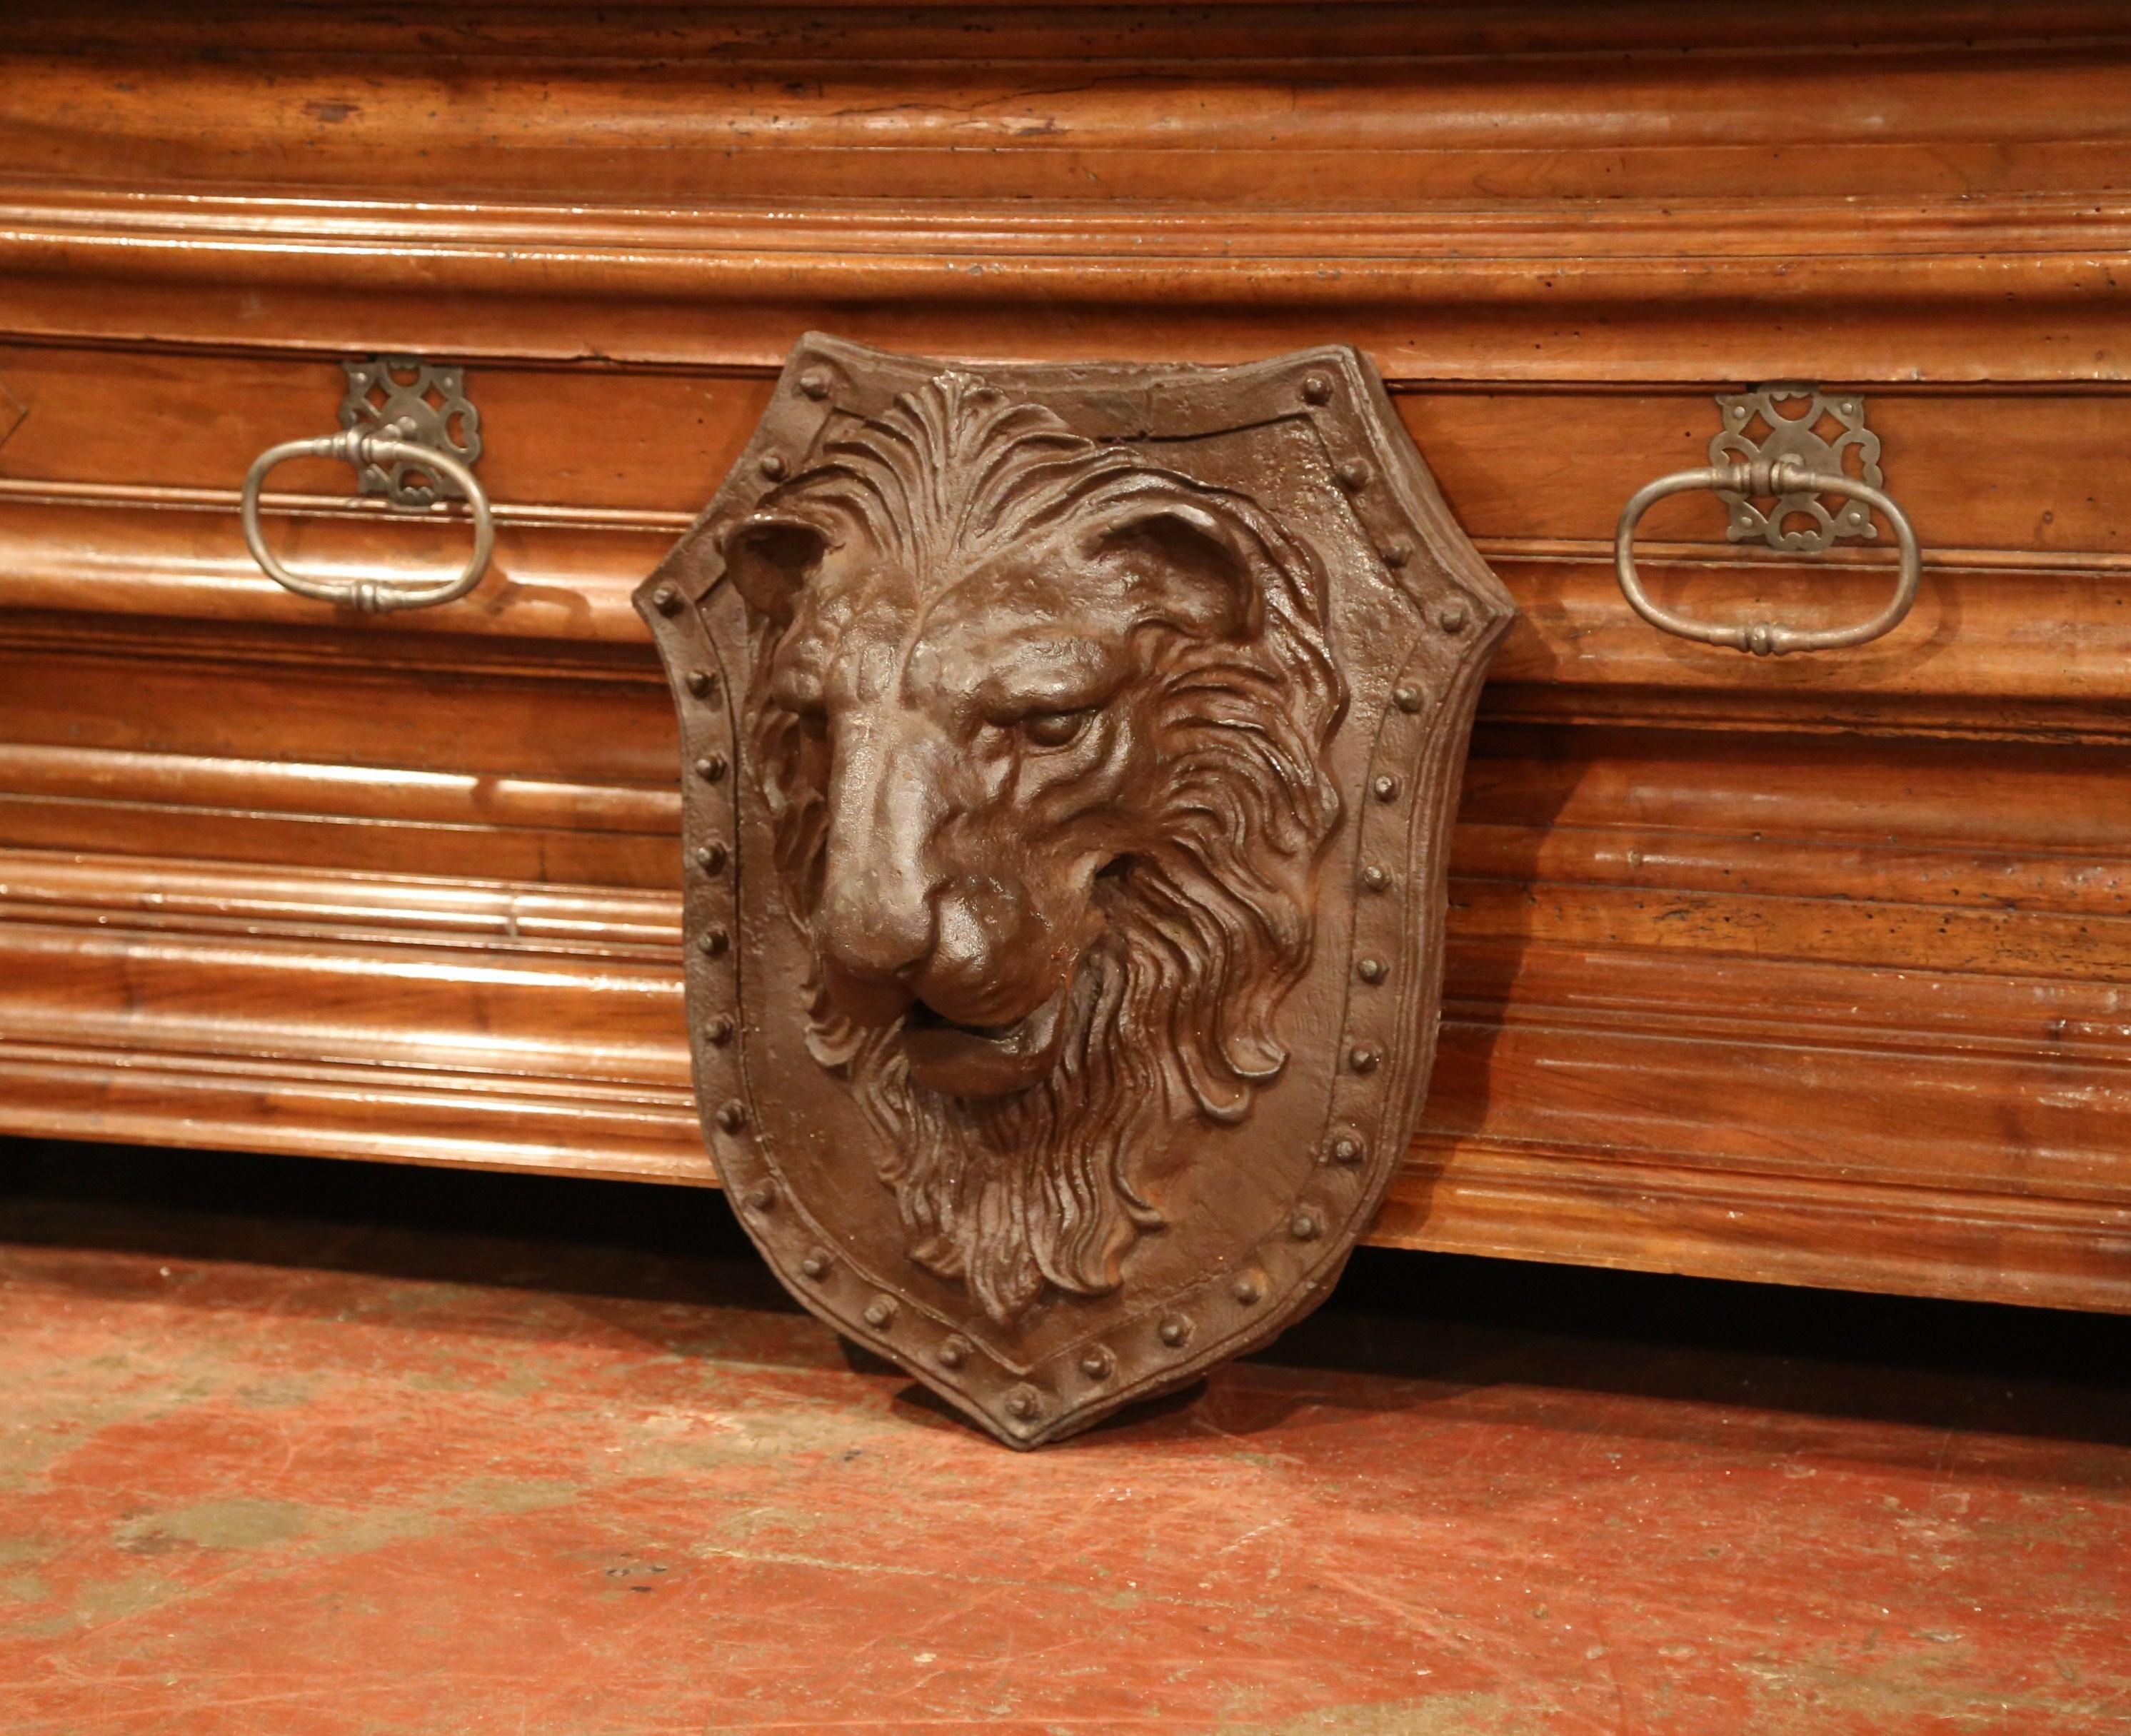 Add strength and power to your house with this wrought iron wall crest; found in Southern France, and crafted, circa 1850, the piece features a high relief forged lion head in the center with decorative bead motif around the perimeter. The mounted